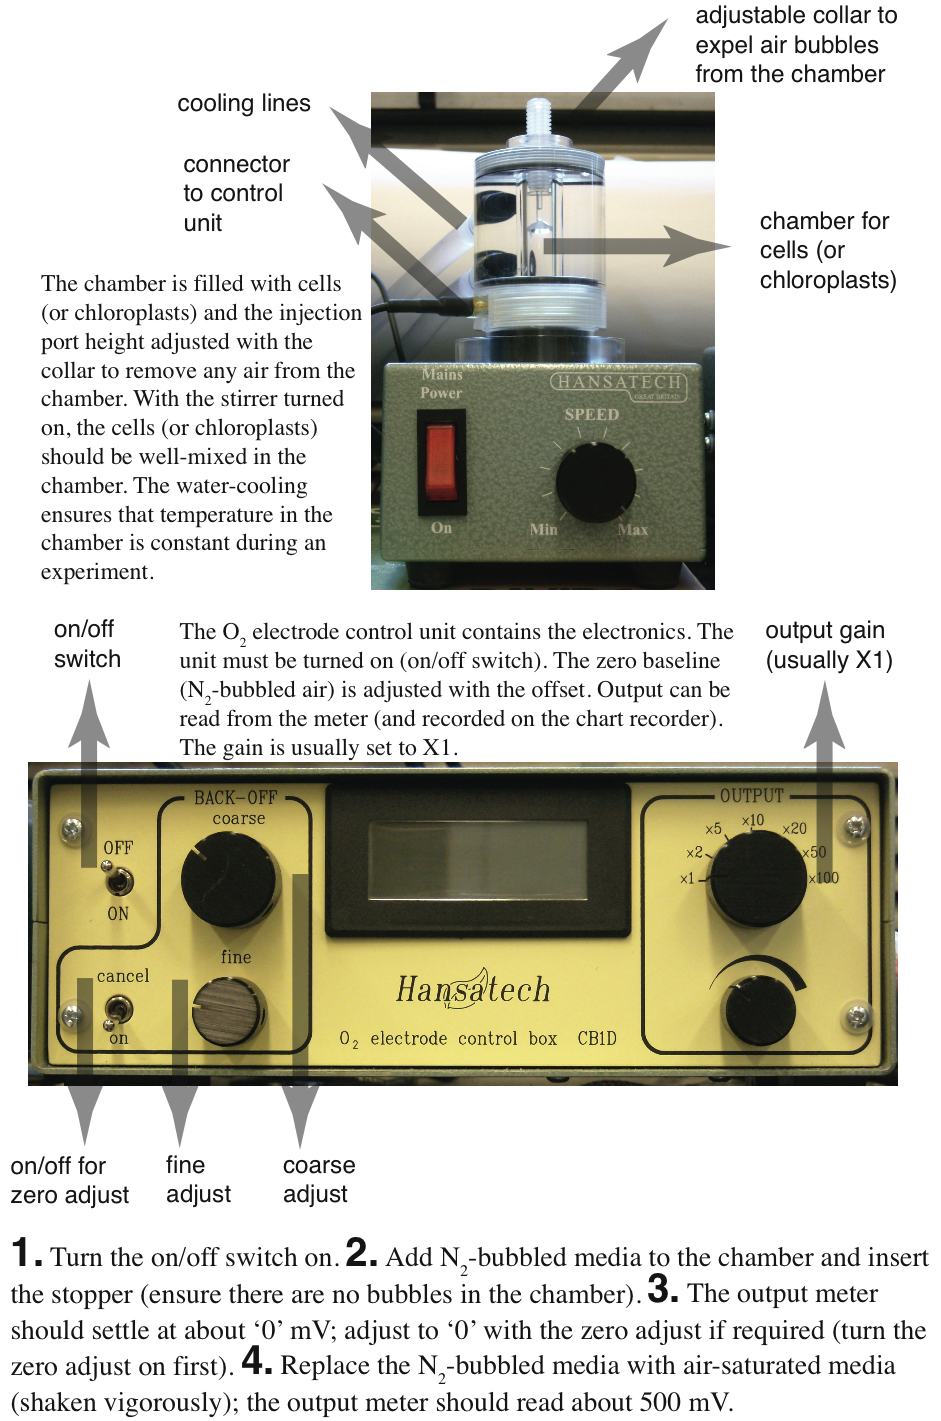 how to operate the Hansatech instrument